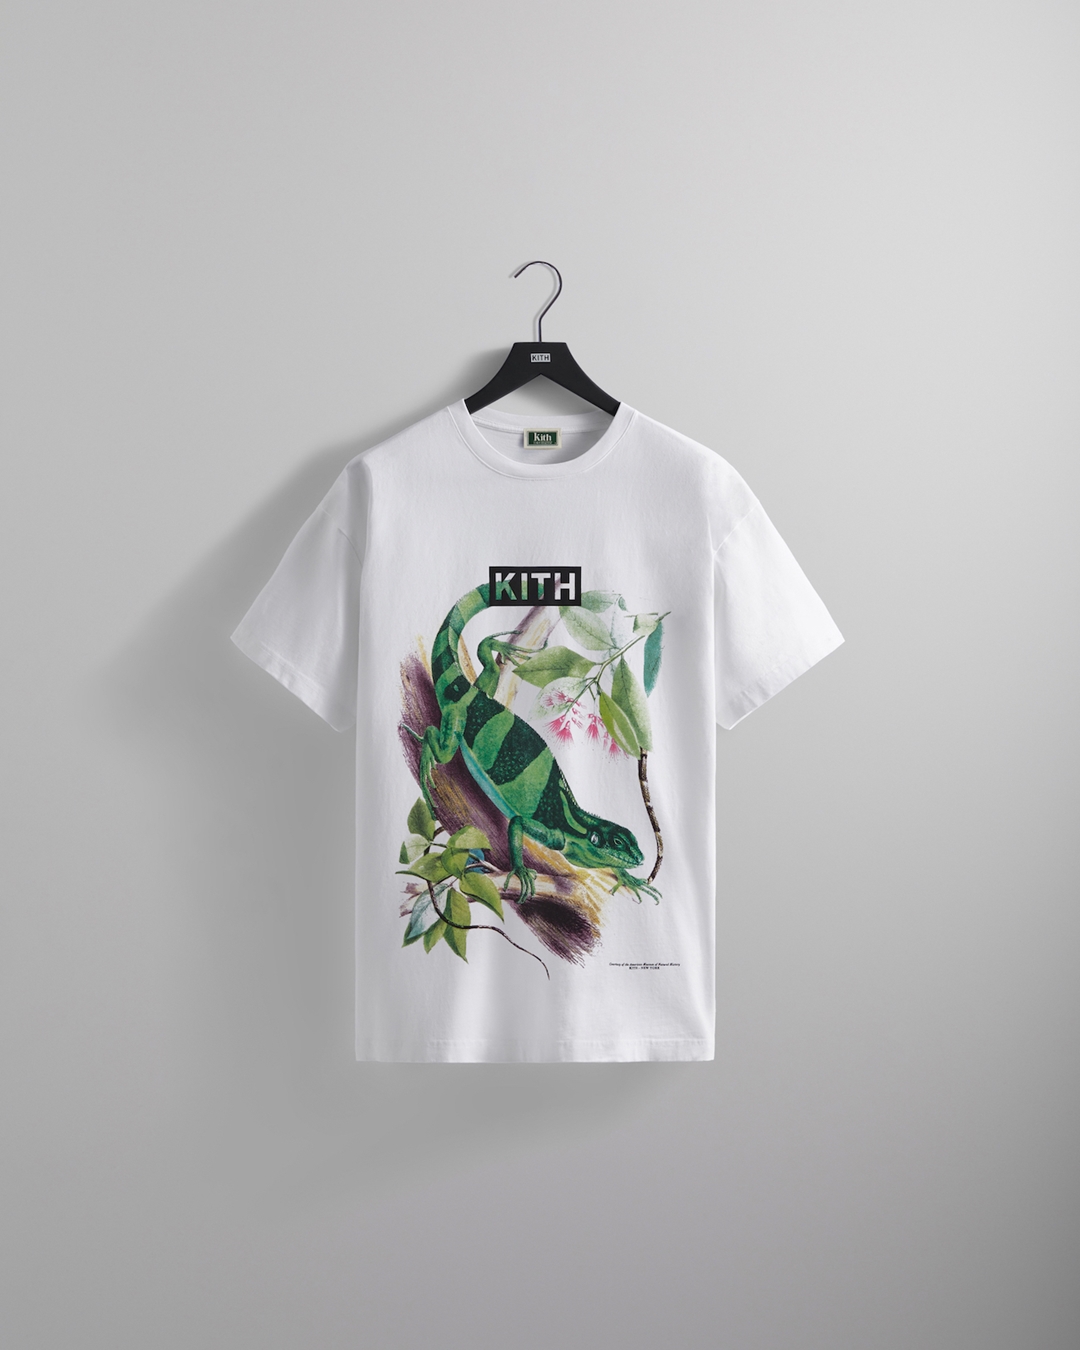 【Kith for the American Museum of Natural History】KITH MONDAY PROGRAM 2022年 8/20 発売 (キス アメリカ自然史博物館)